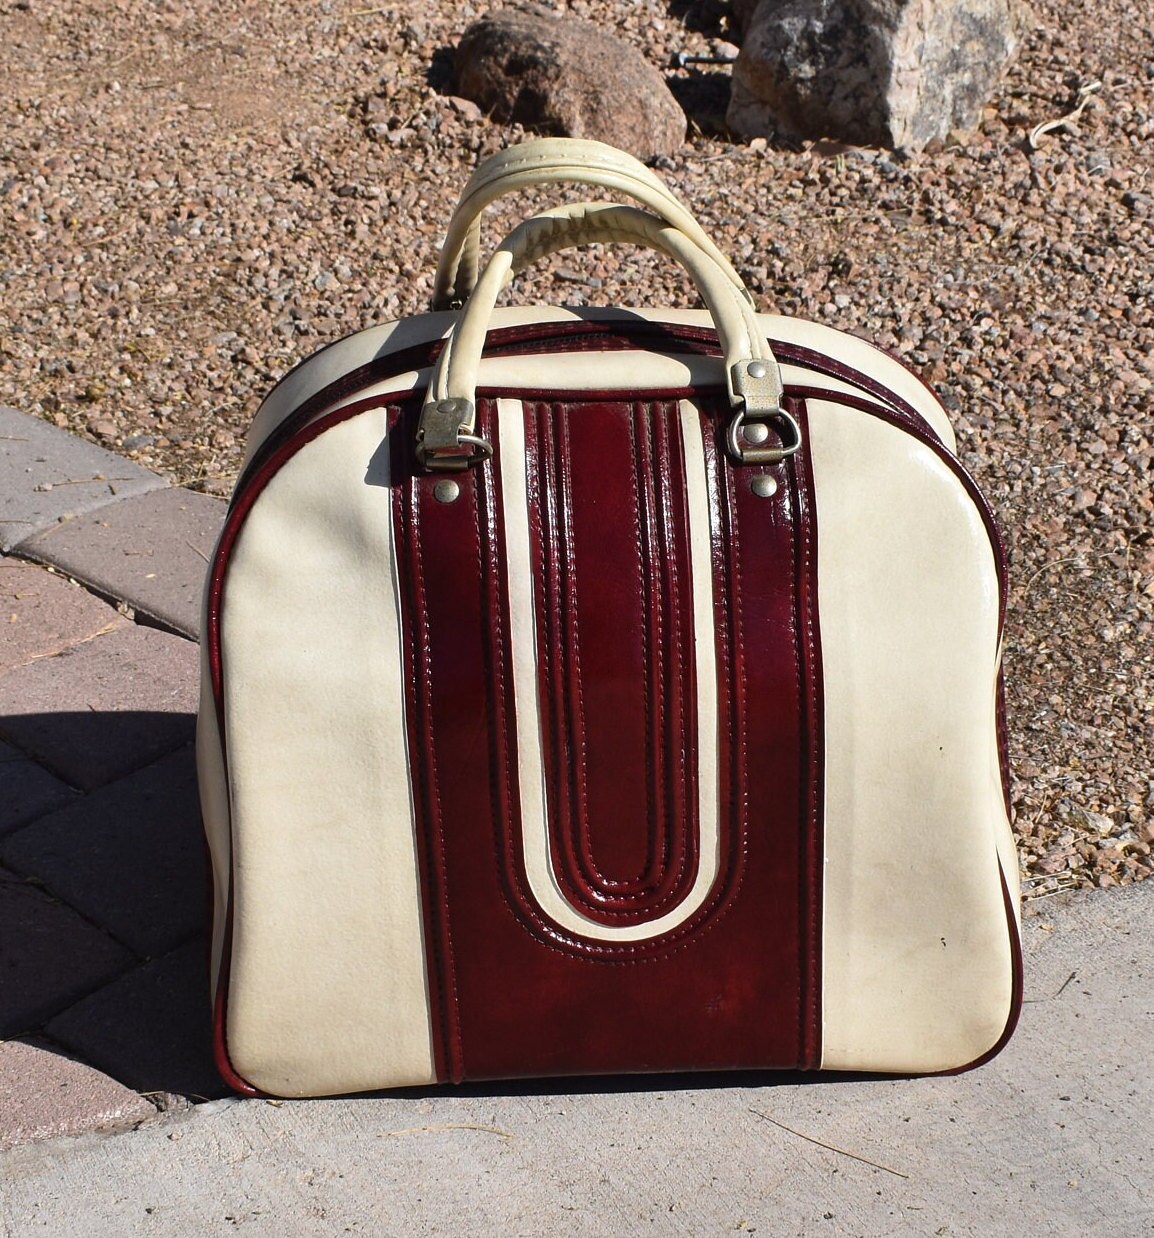 Vintage Bowling Ball Bag Burgundy and Marbled White 